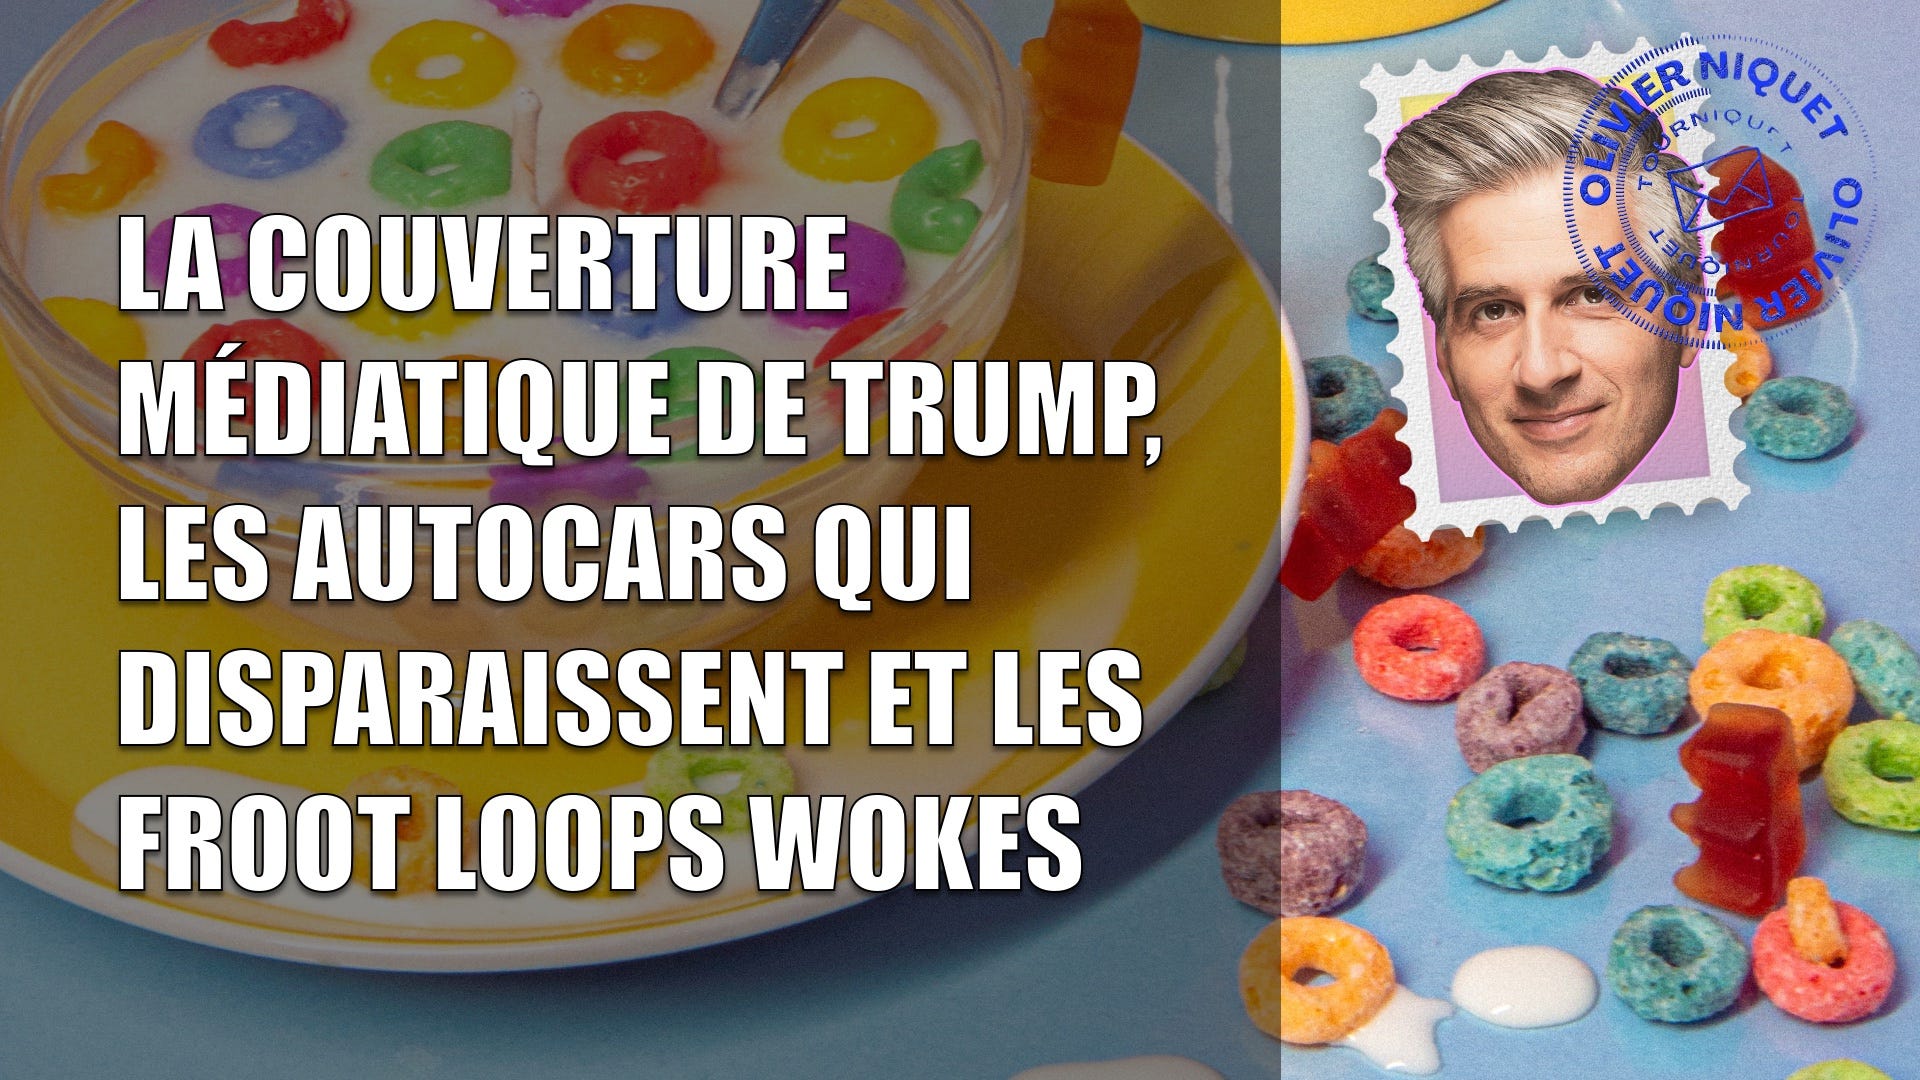 Right wingers are now targeting Froot Loops for being too 'woke